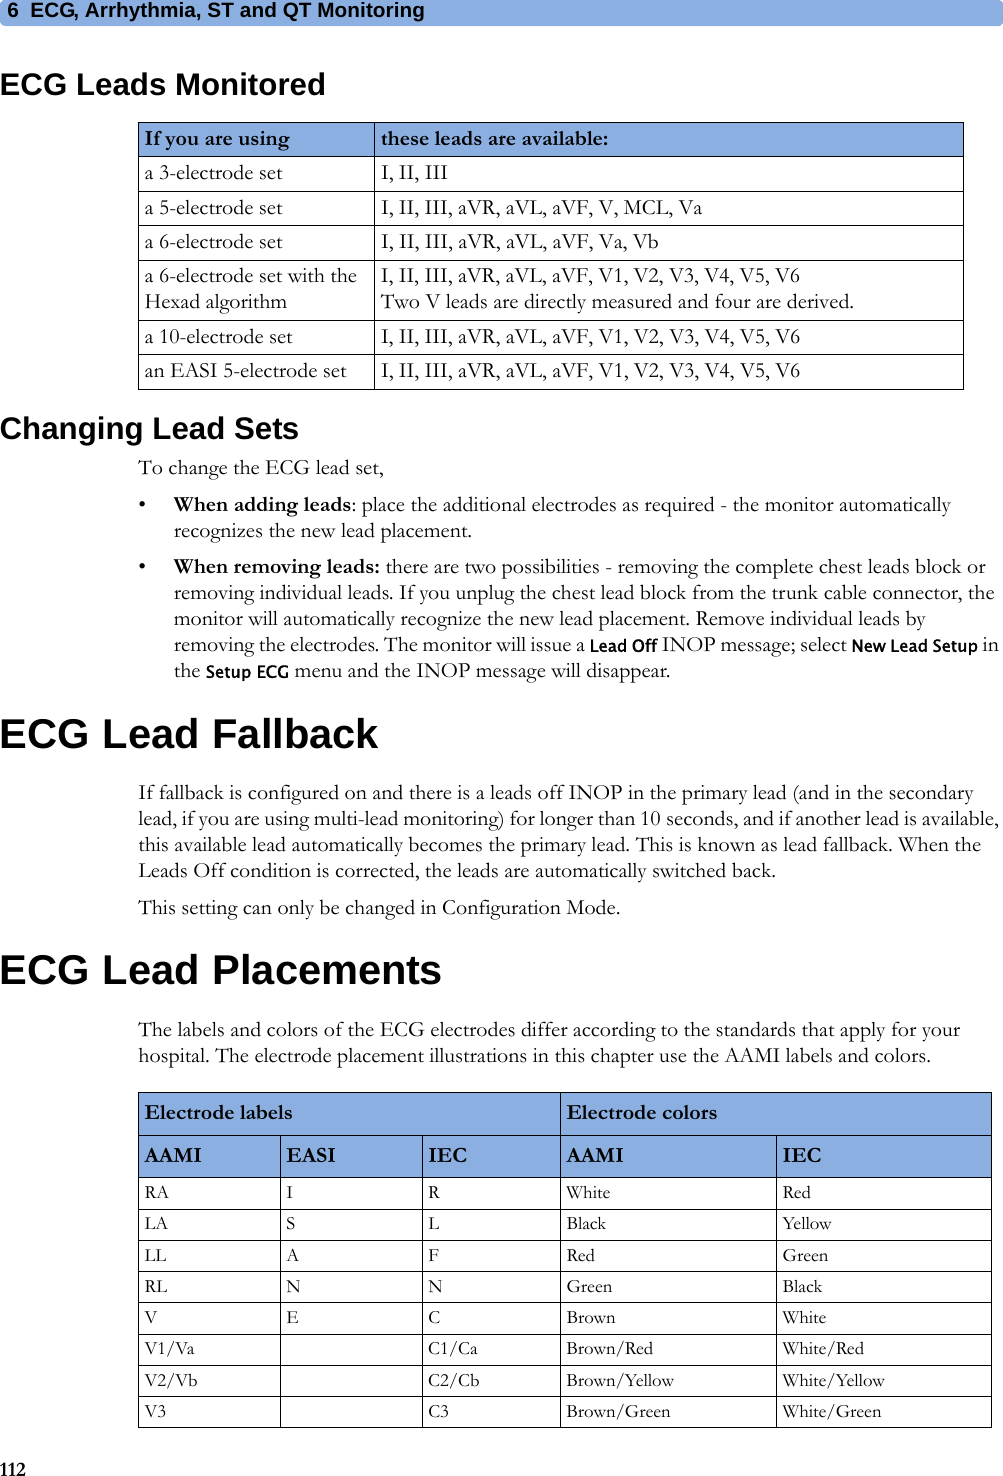 6 ECG, Arrhythmia, ST and QT Monitoring112ECG Leads MonitoredChanging Lead SetsTo change the ECG lead set,•When adding leads: place the additional electrodes as required - the monitor automatically recognizes the new lead placement.•When removing leads: there are two possibilities - removing the complete chest leads block or removing individual leads. If you unplug the chest lead block from the trunk cable connector, the monitor will automatically recognize the new lead placement. Remove individual leads by removing the electrodes. The monitor will issue a Lead Off INOP message; select New Lead Setup in the Setup ECG menu and the INOP message will disappear.ECG Lead FallbackIf fallback is configured on and there is a leads off INOP in the primary lead (and in the secondary lead, if you are using multi-lead monitoring) for longer than 10 seconds, and if another lead is available, this available lead automatically becomes the primary lead. This is known as lead fallback. When the Leads Off condition is corrected, the leads are automatically switched back.This setting can only be changed in Configuration Mode.ECG Lead PlacementsThe labels and colors of the ECG electrodes differ according to the standards that apply for your hospital. The electrode placement illustrations in this chapter use the AAMI labels and colors.If you are using these leads are available:a 3-electrode set I, II, IIIa 5-electrode set I, II, III, aVR, aVL, aVF, V, MCL, Vaa 6-electrode set I, II, III, aVR, aVL, aVF, Va, Vba 6-electrode set with the Hexad algorithmI, II, III, aVR, aVL, aVF, V1, V2, V3, V4, V5, V6Two V leads are directly measured and four are derived.a 10-electrode set I, II, III, aVR, aVL, aVF, V1, V2, V3, V4, V5, V6an EASI 5-electrode set I, II, III, aVR, aVL, aVF, V1, V2, V3, V4, V5, V6Electrode labels Electrode colorsAAMI EASI IEC AAMI IECRA I R White RedLA S L Black YellowLL A F Red GreenRL N N Green BlackVECBrown WhiteV1/Va C1/Ca Brown/Red White/RedV2/Vb C2/Cb Brown/Yellow White/YellowV3 C3 Brown/Green White/Green